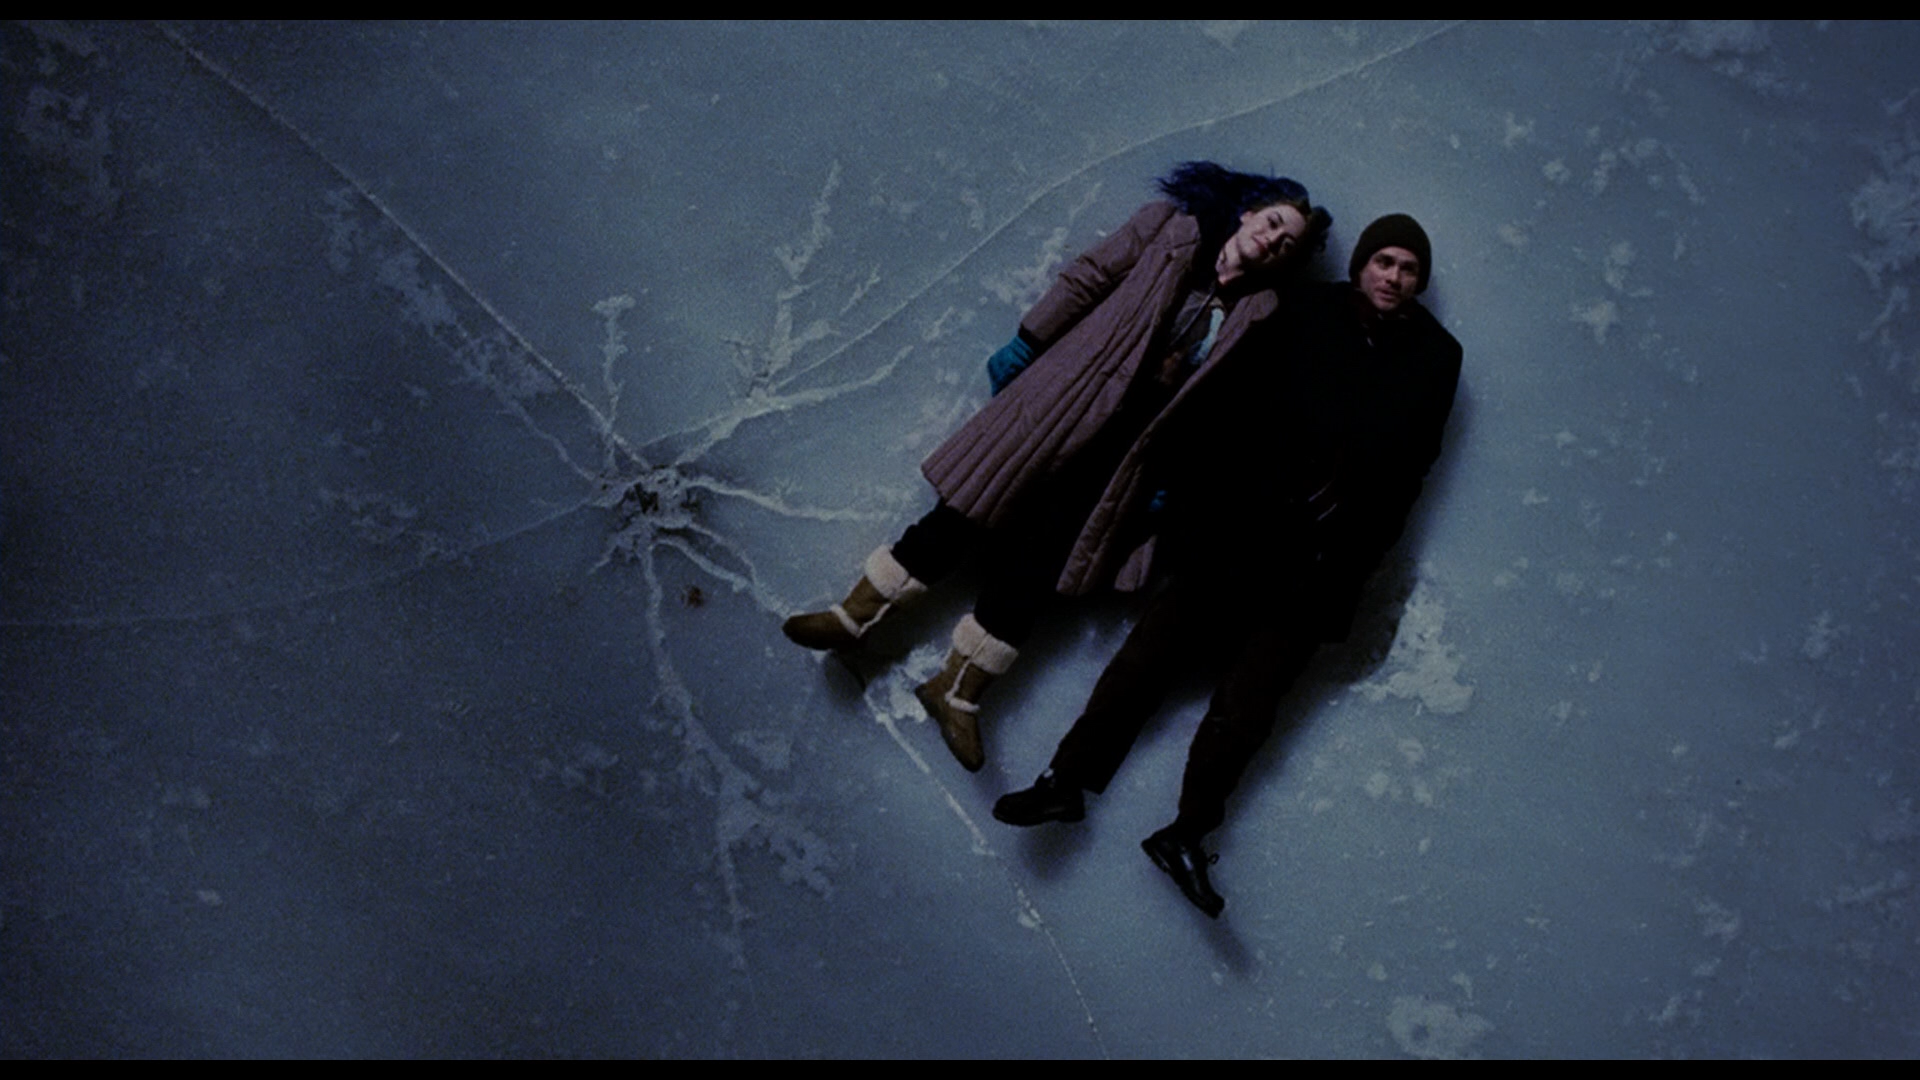 HQ Eternal Sunshine Of The Spotless Mind Wallpapers | File 2320.38Kb